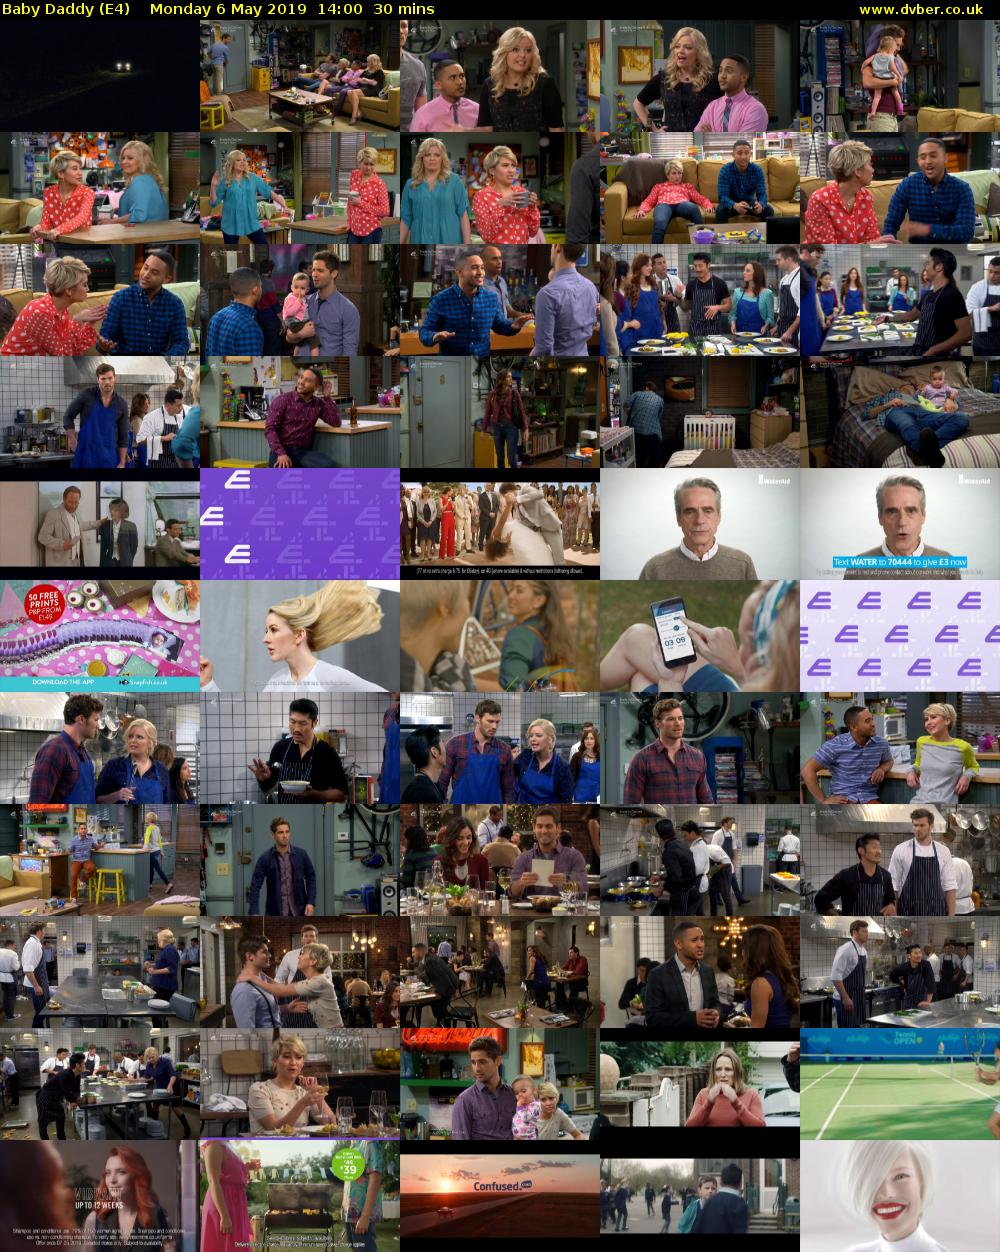 Baby Daddy (E4) Monday 6 May 2019 14:00 - 14:30